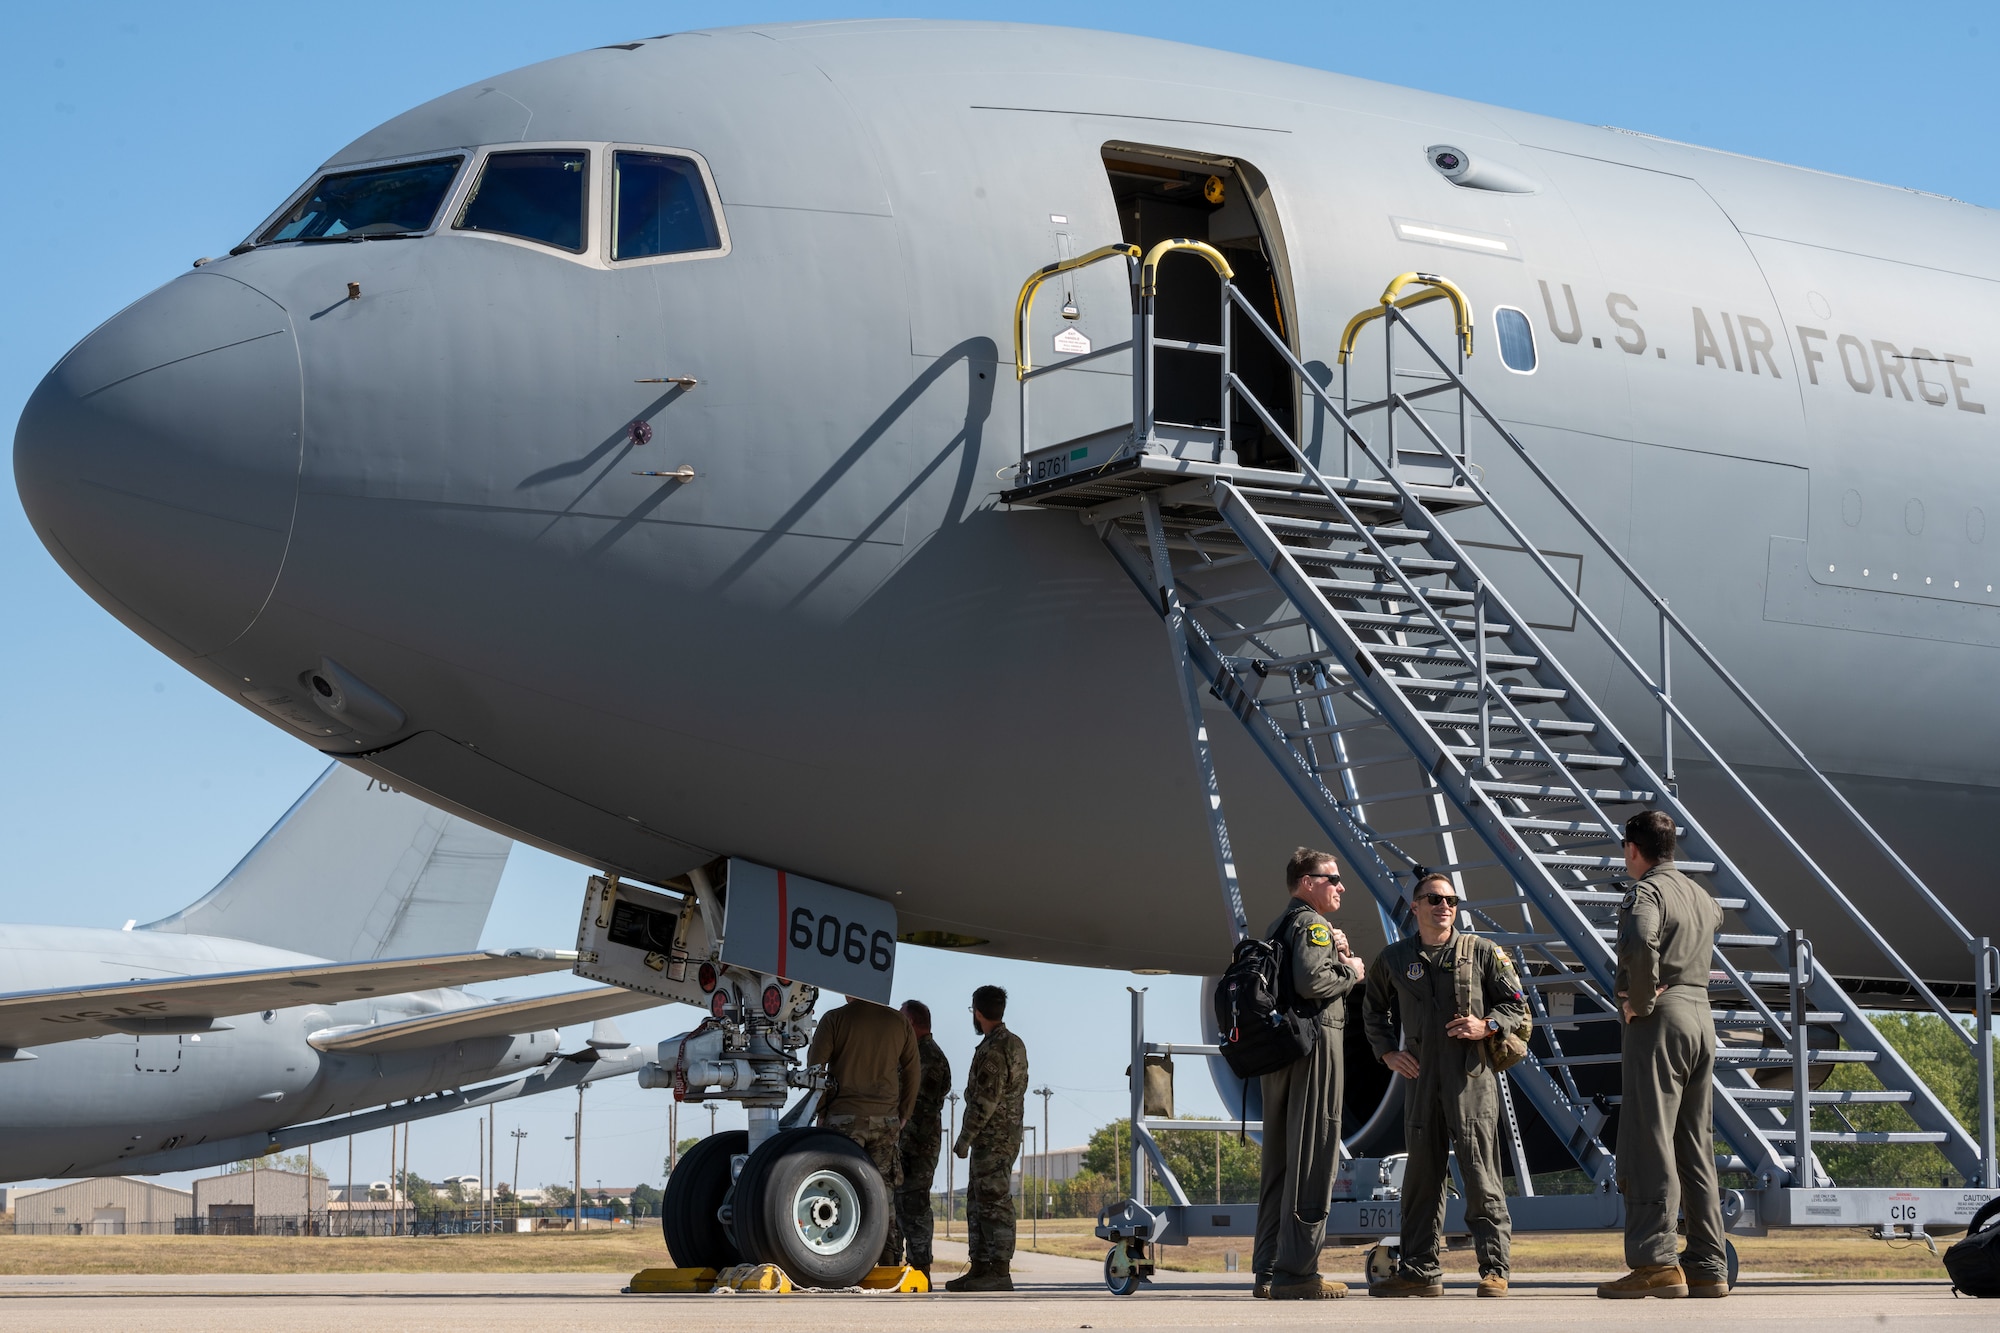 Pilots and maintenance crews from the 916th Air Refueling Wing await transport after landing on Sep. 29, 2022, at McConnell Air Force Base, Kansas. 41 Airmen accompanied the nine KC-46As sent to escape the path of hurricane Ian. (U.S. Air Force photo by Staff Sgt. Nathan Eckert)